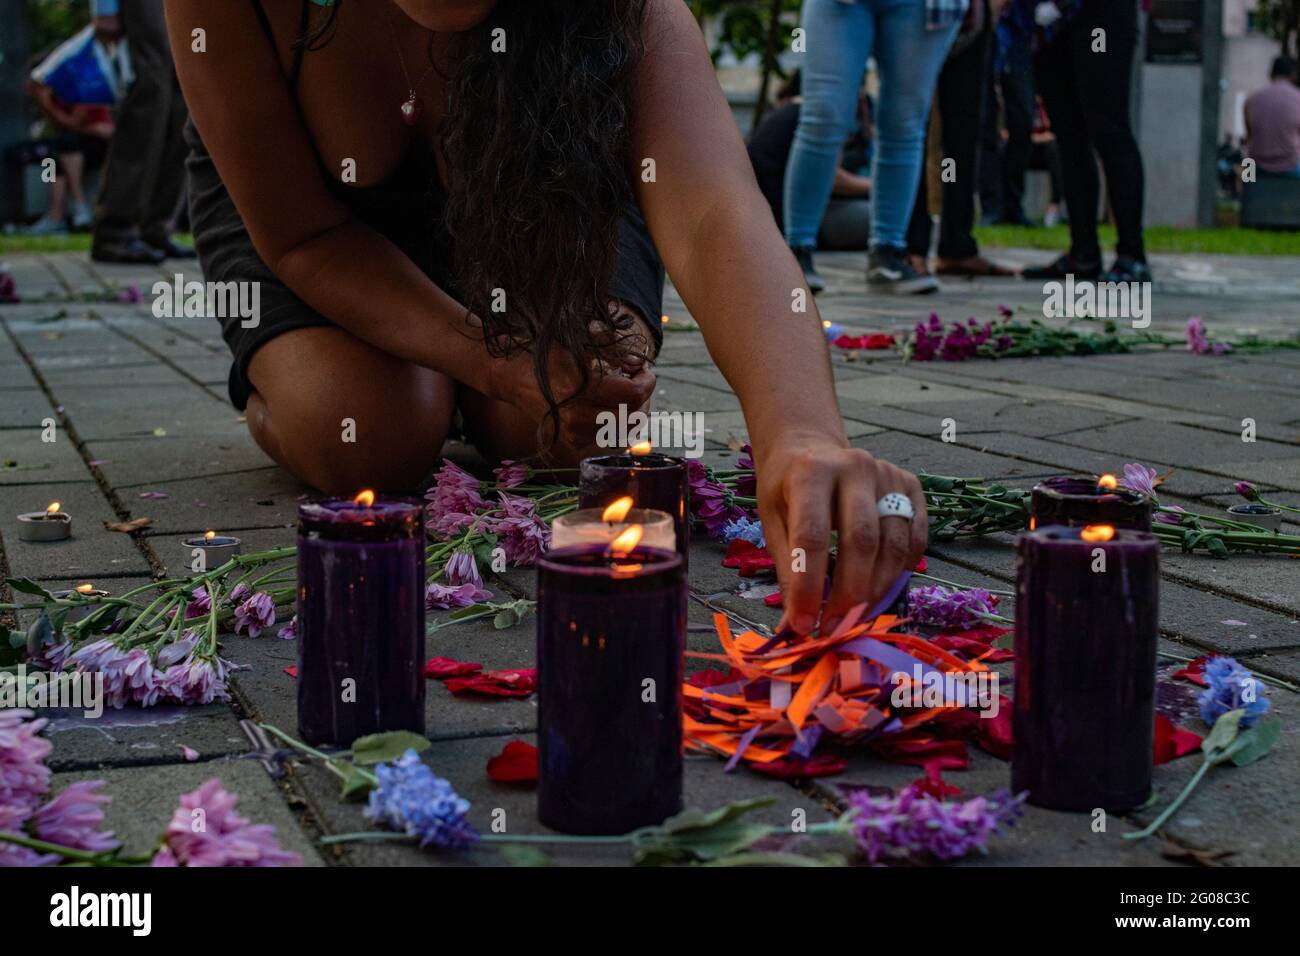 Medellin, Colombia. May 31, 2021 Groups of feminists participate in a Vigil for the lives of the demonstrators during the anti-government protests that leaves at least 70 dead in the first month of protests against the government of president Ivan Duque and Police Brutality on May 31, 2021 in Medellin, Colombia. Stock Photo